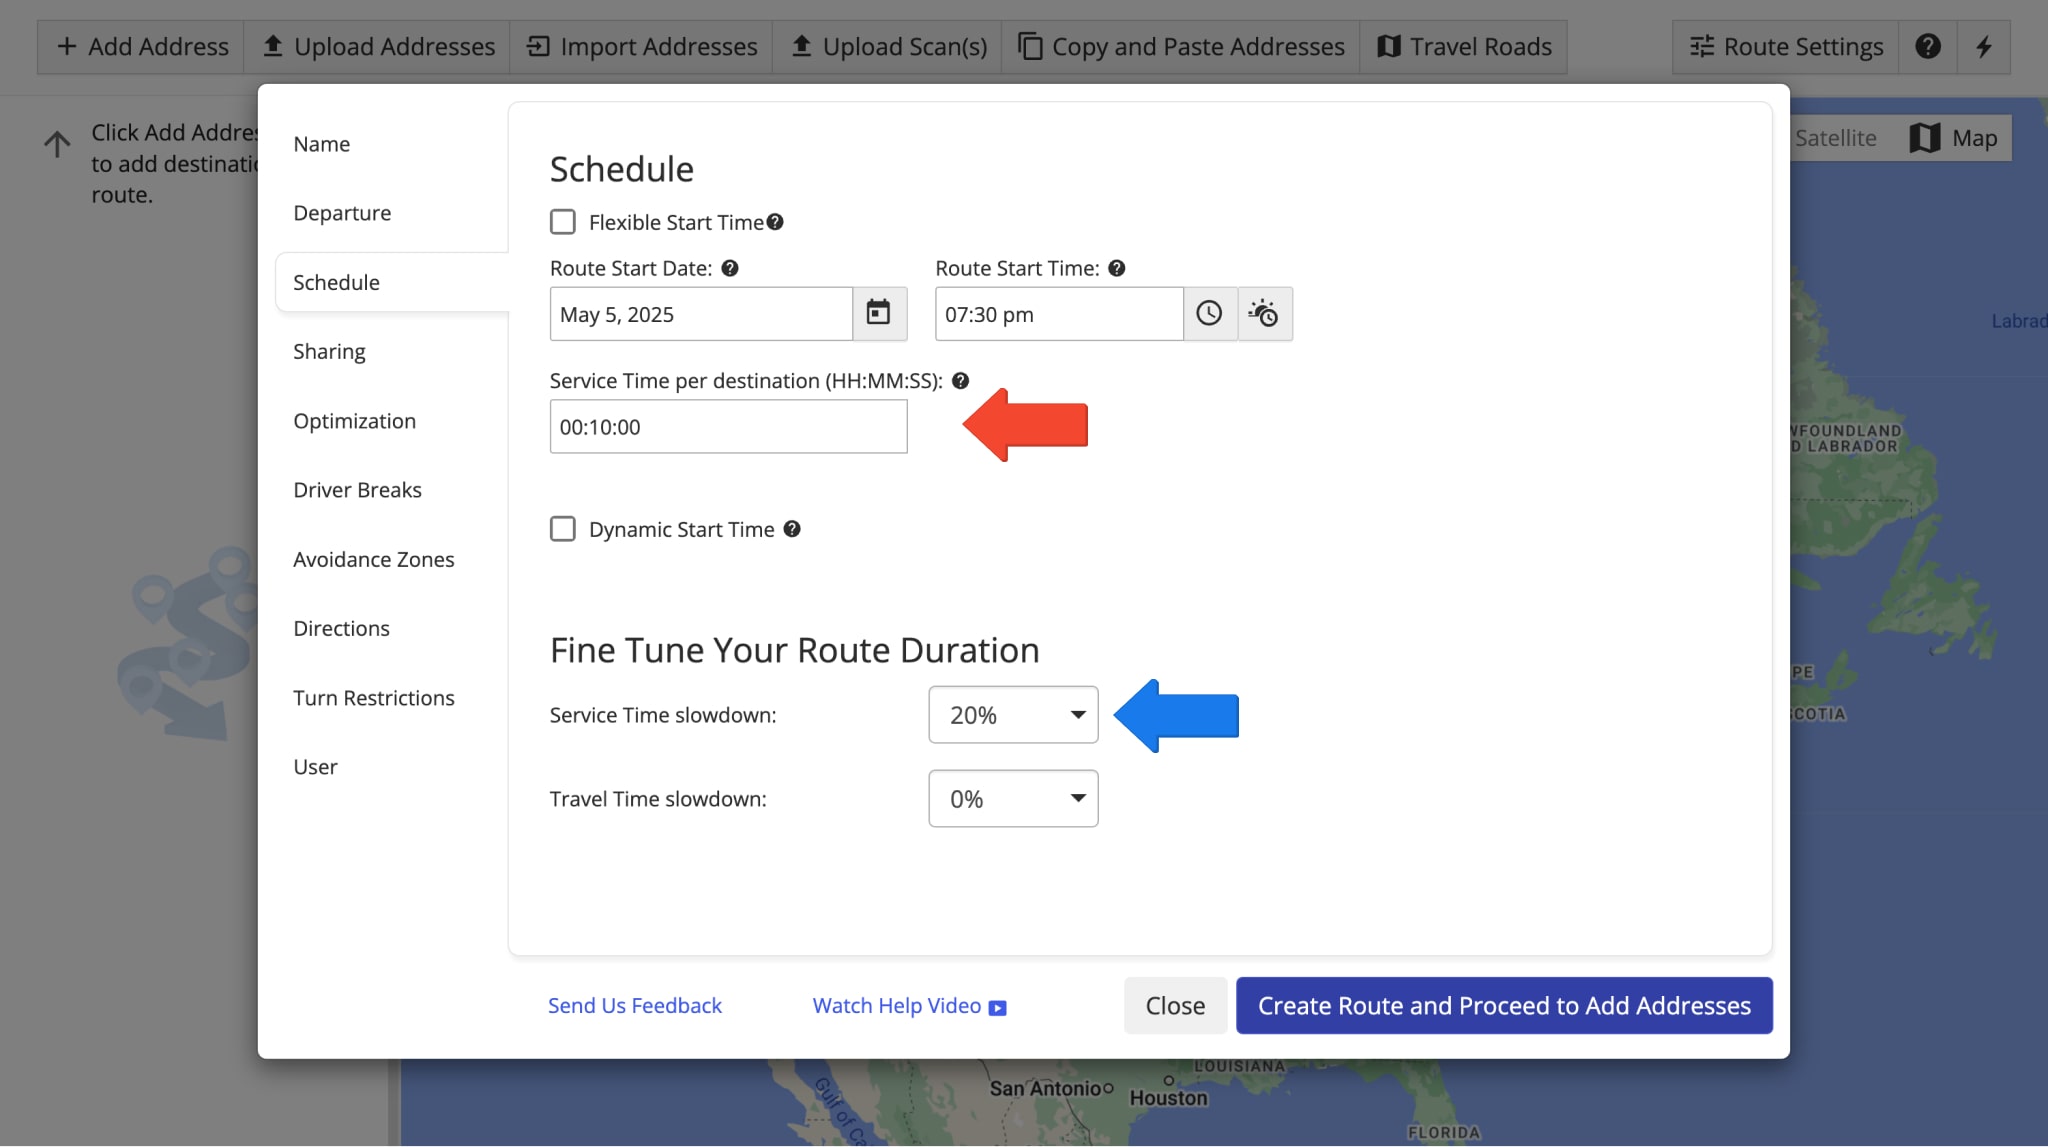 Manually set Service Time and Service Time Slowdown for all route destinations in Optimization Settings.